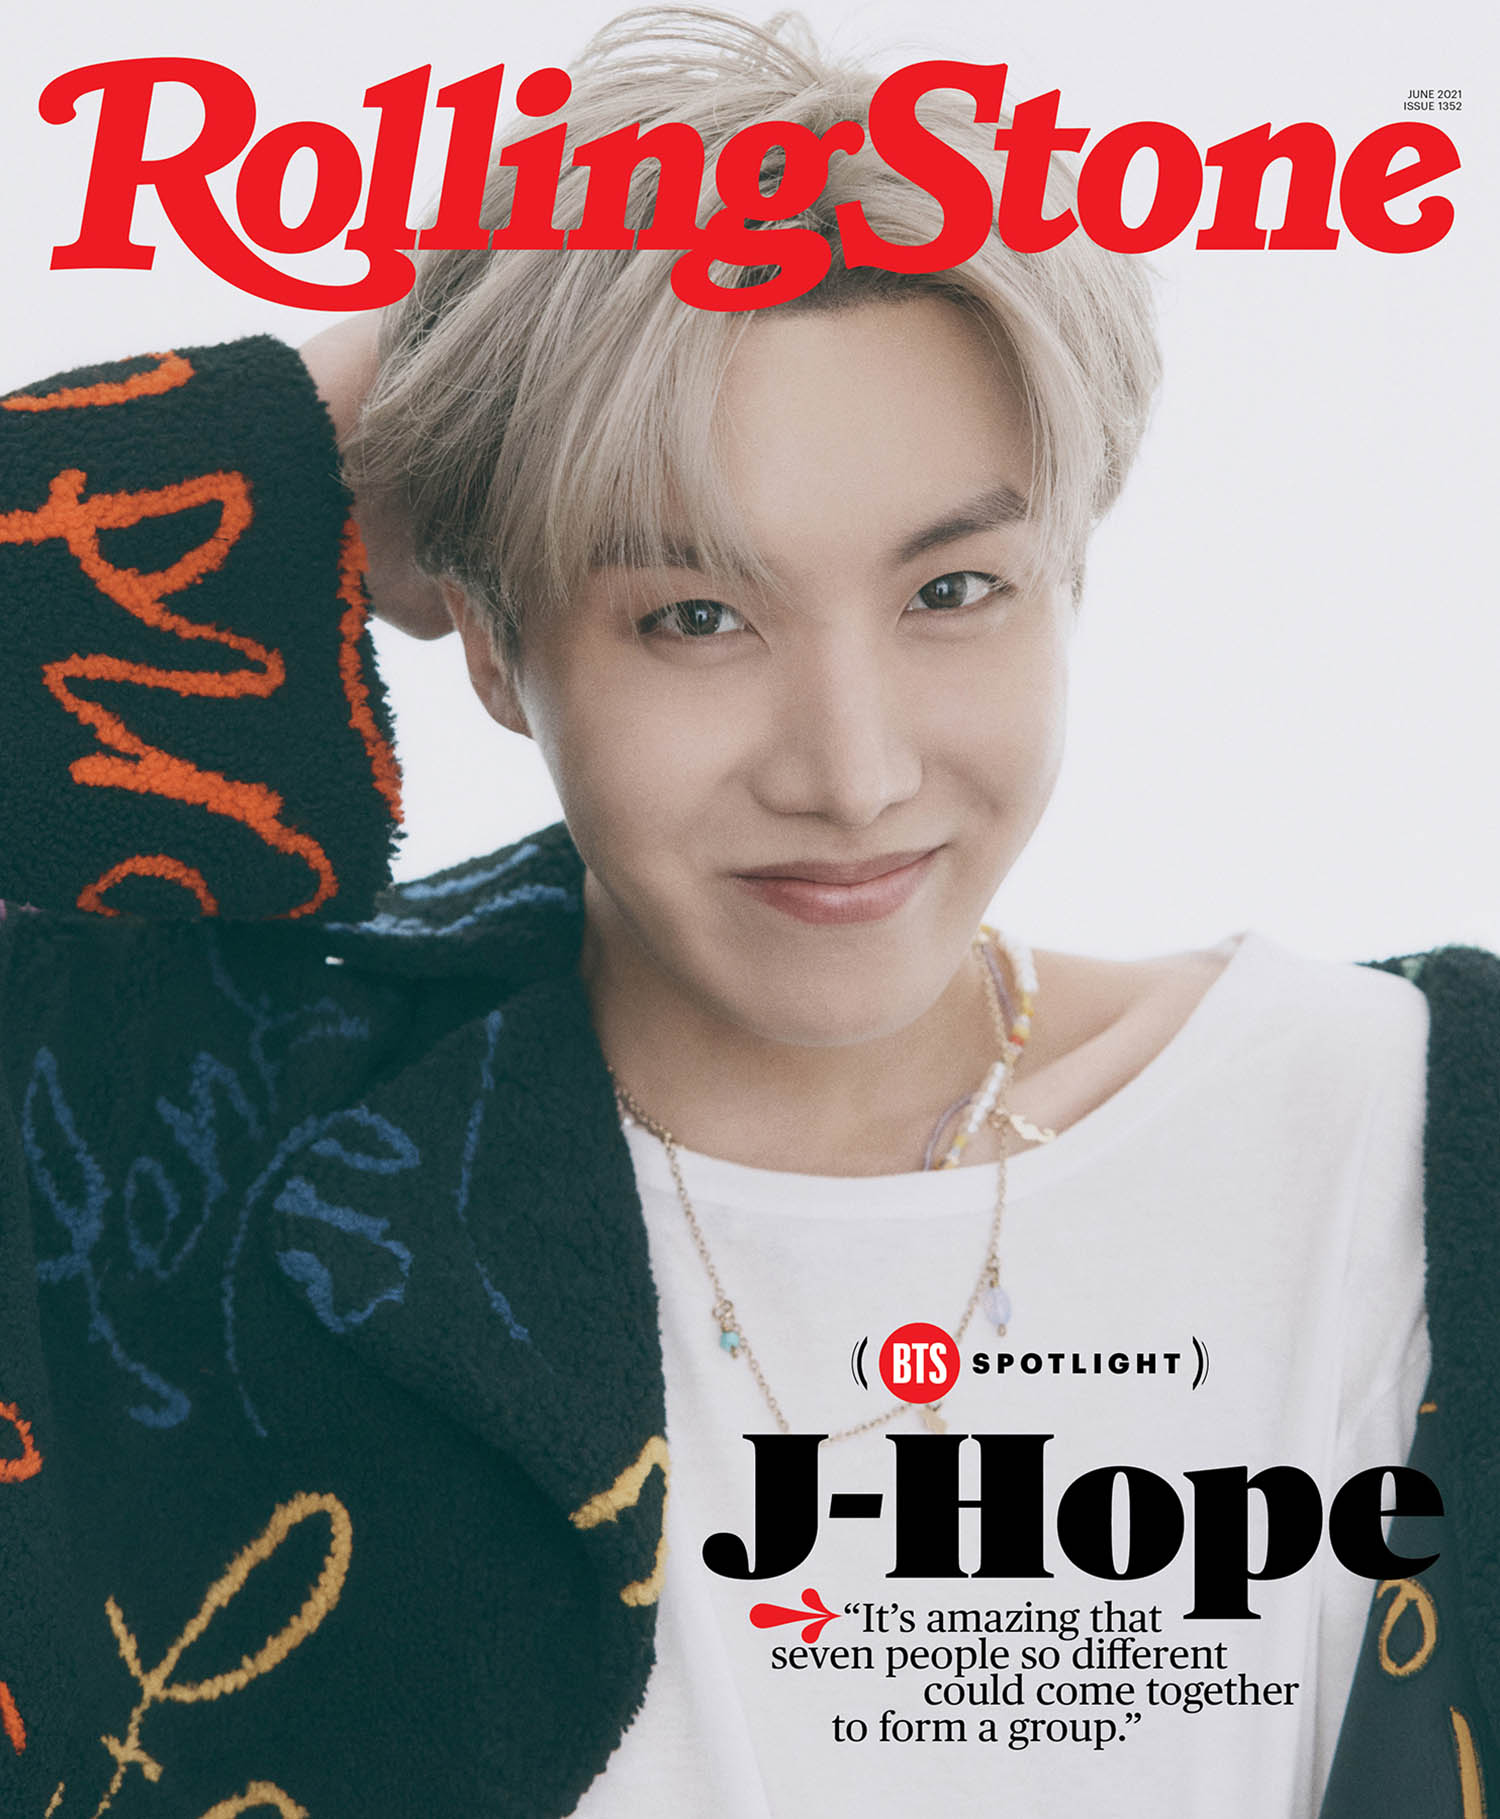 BTS covers Rolling Stone June 2021 by Hong Janghyun